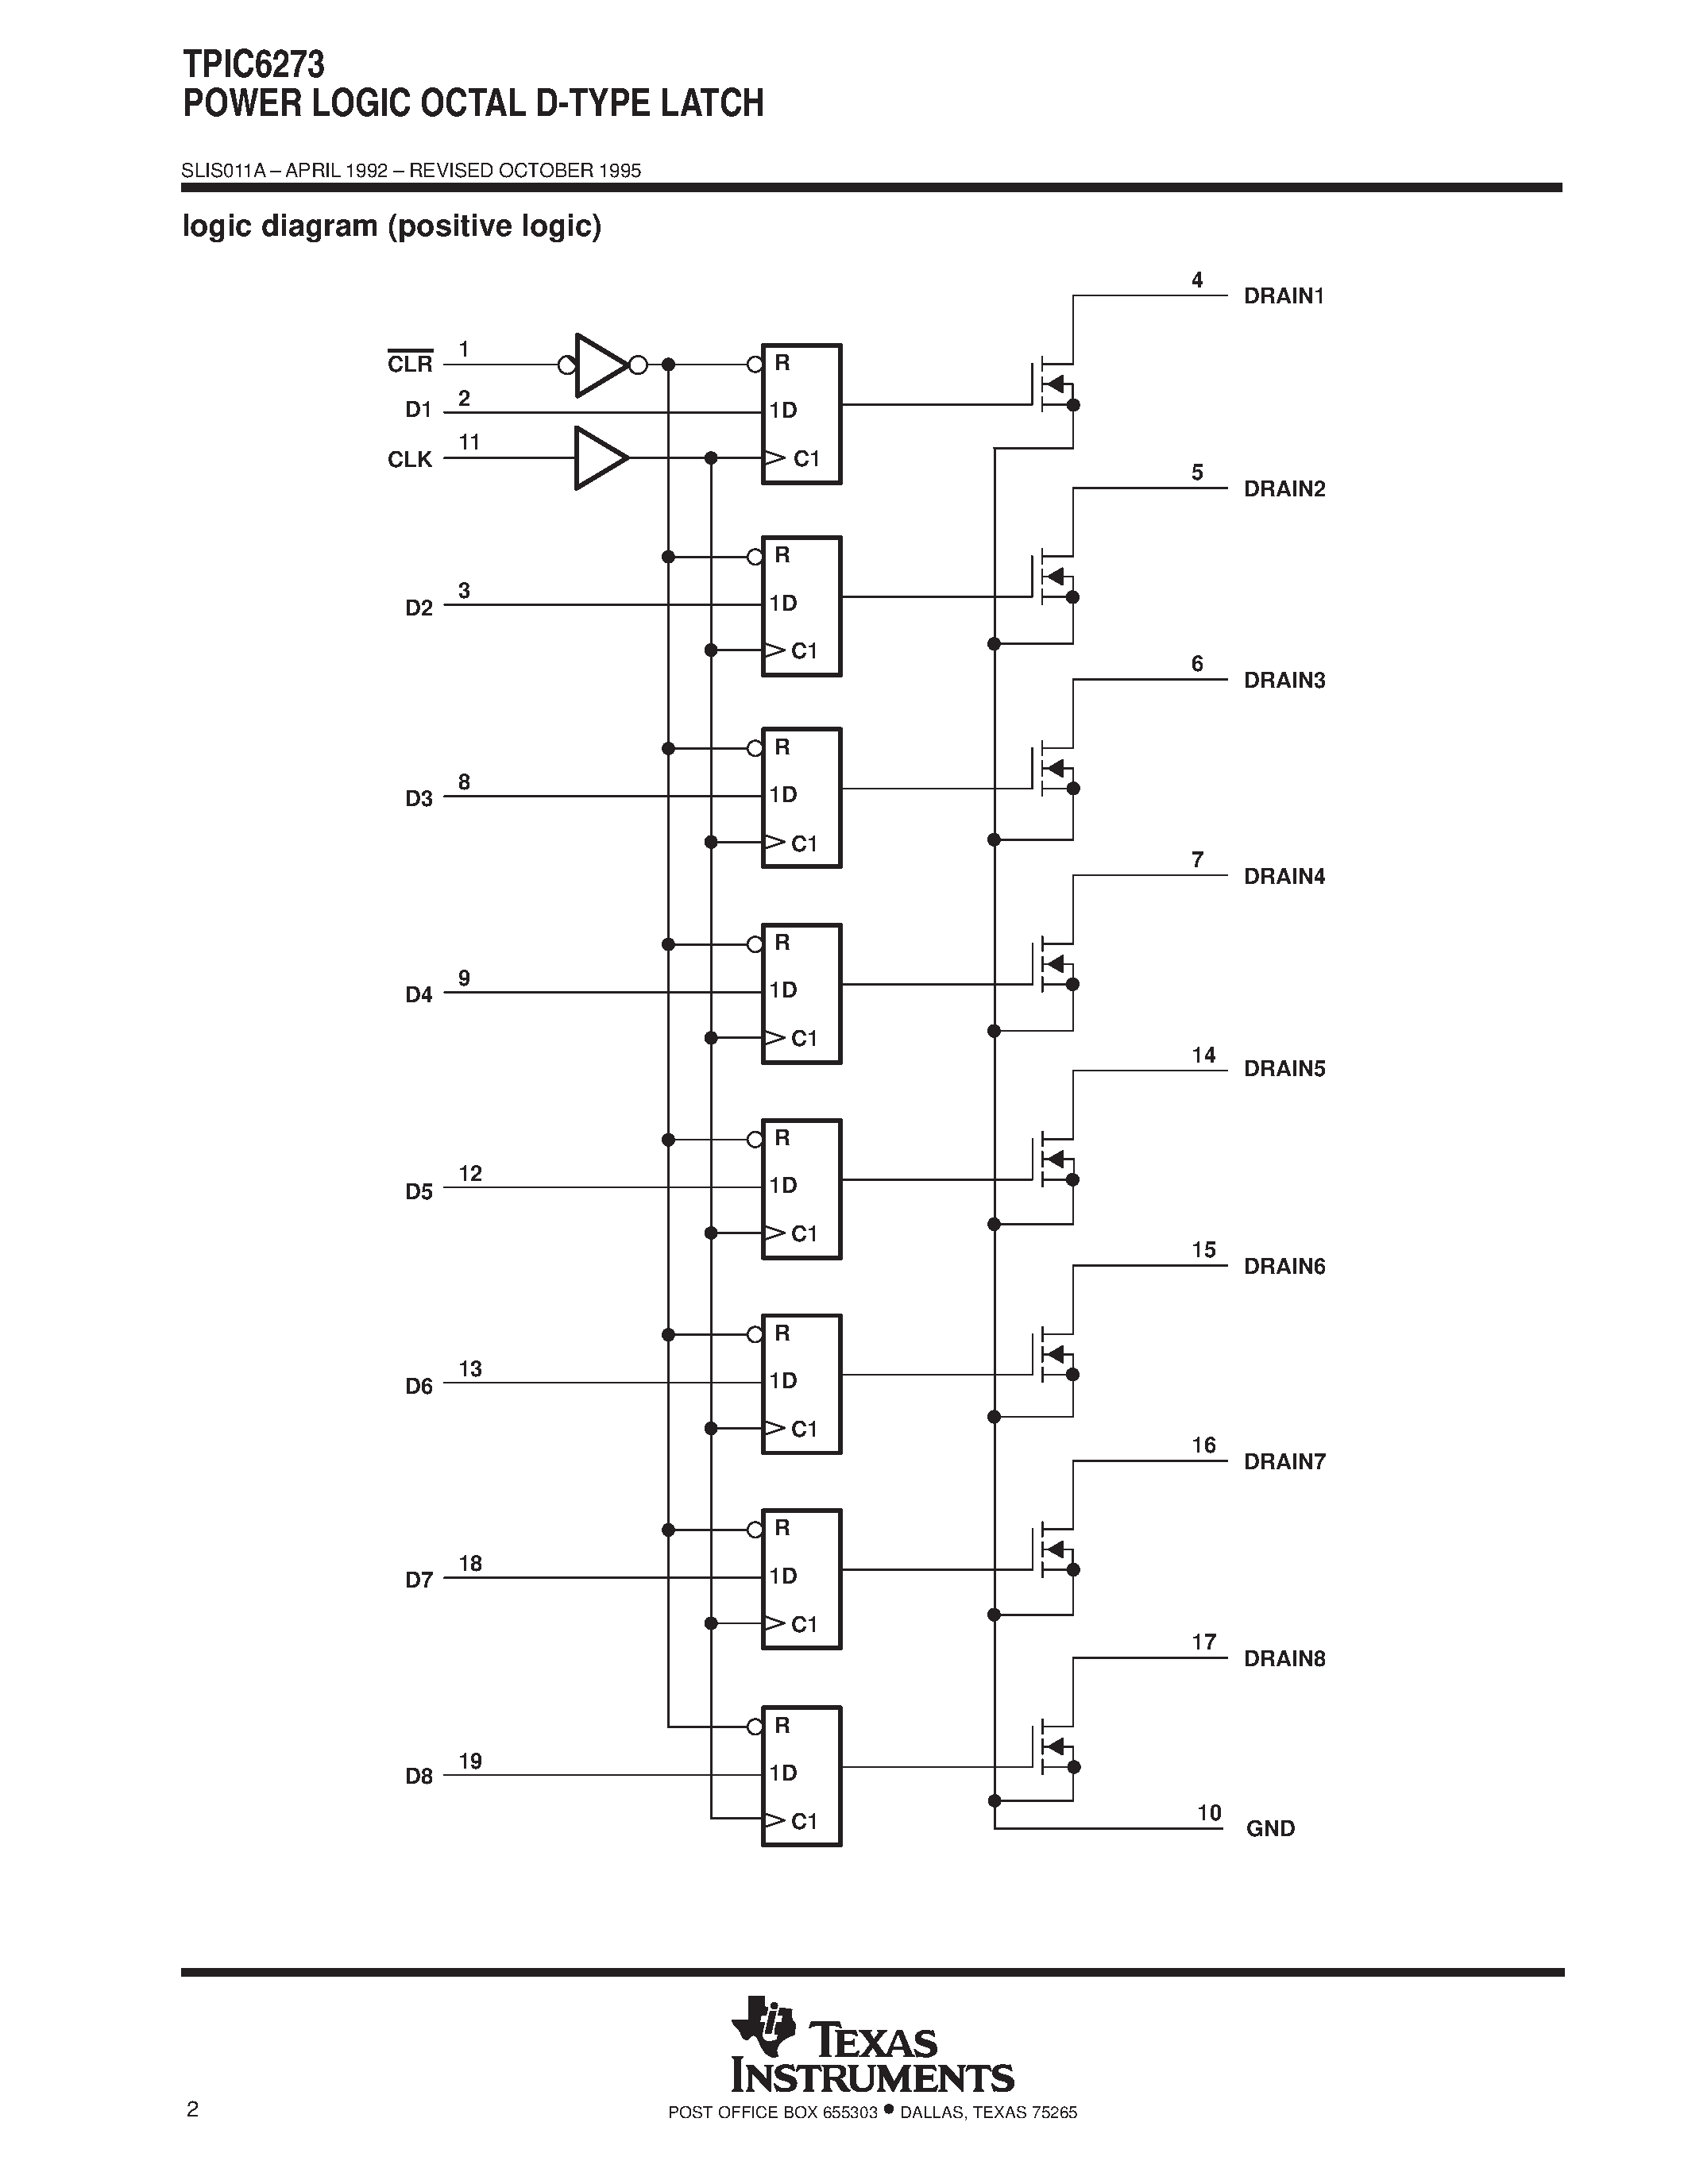 Datasheet TPIC6273 - POWER LOGIC OCTAL D-TYPE LATCH page 2